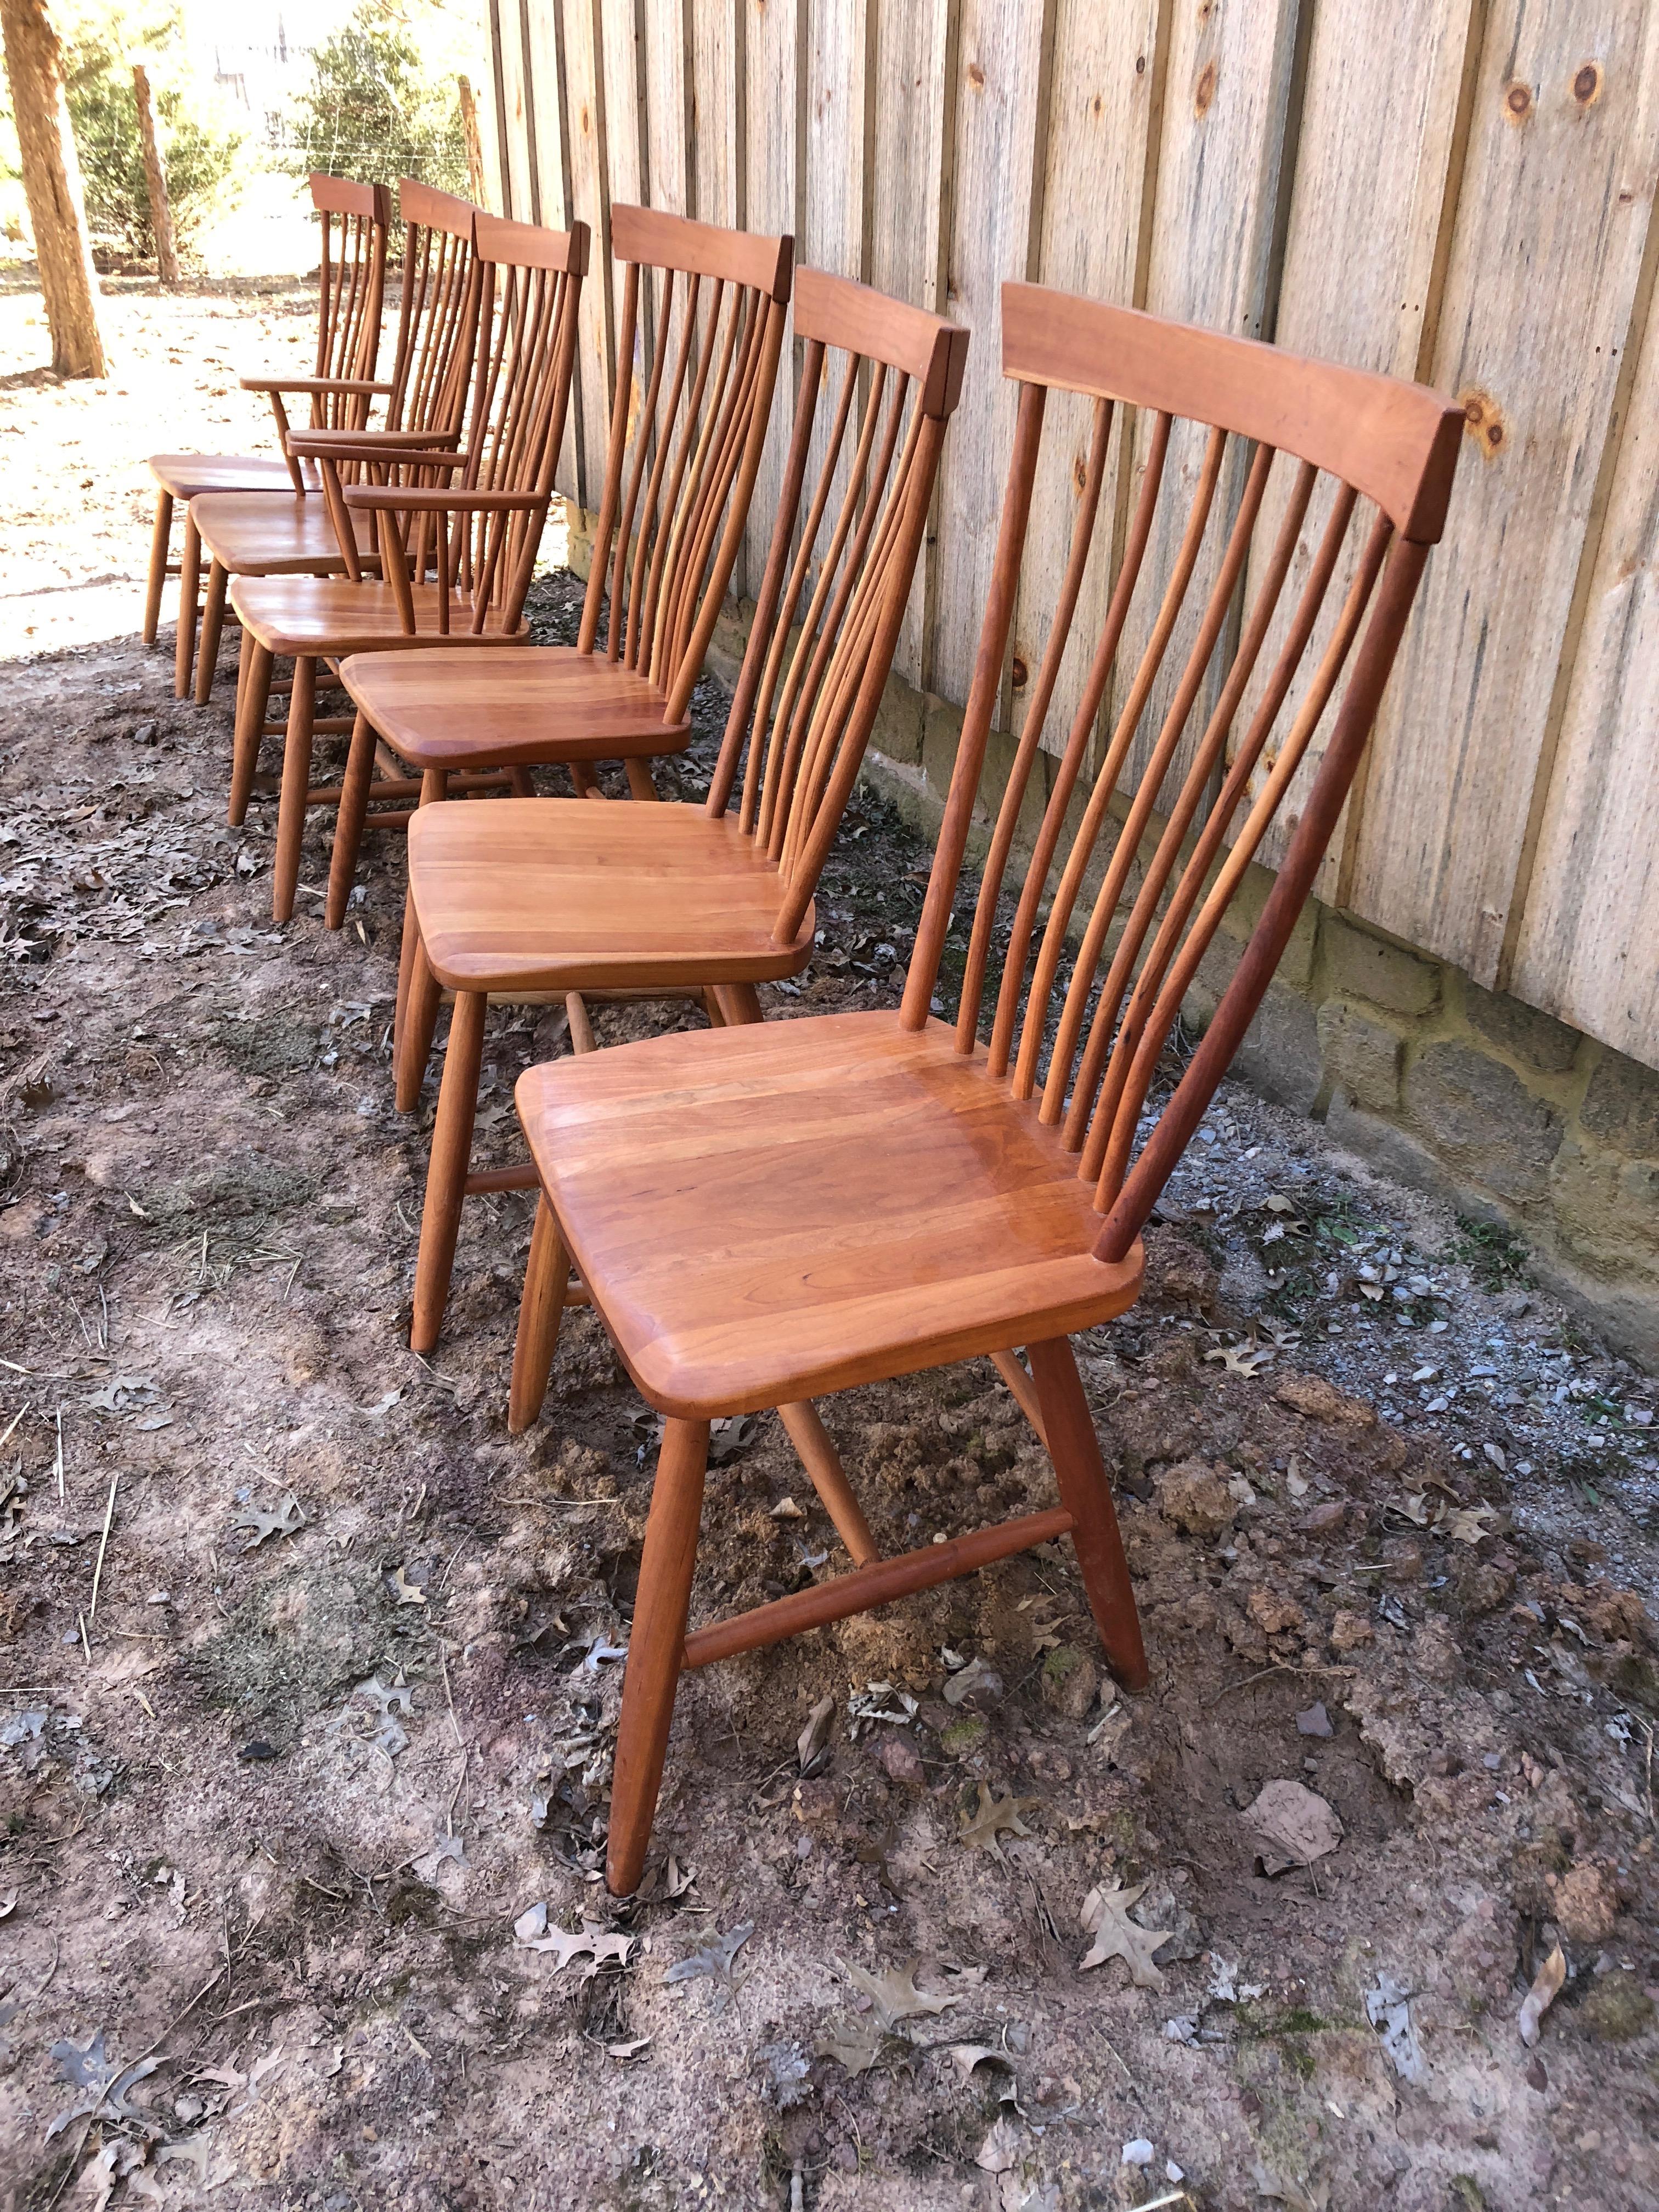 A Classic set of handcrafted Cherry Amish style dining chairs signed under the seats by Eli Hostetler.
Armchairs are 23.5 W arm to arm 39.75 H, 17.25 D, seat height 17.71, arm height 26.